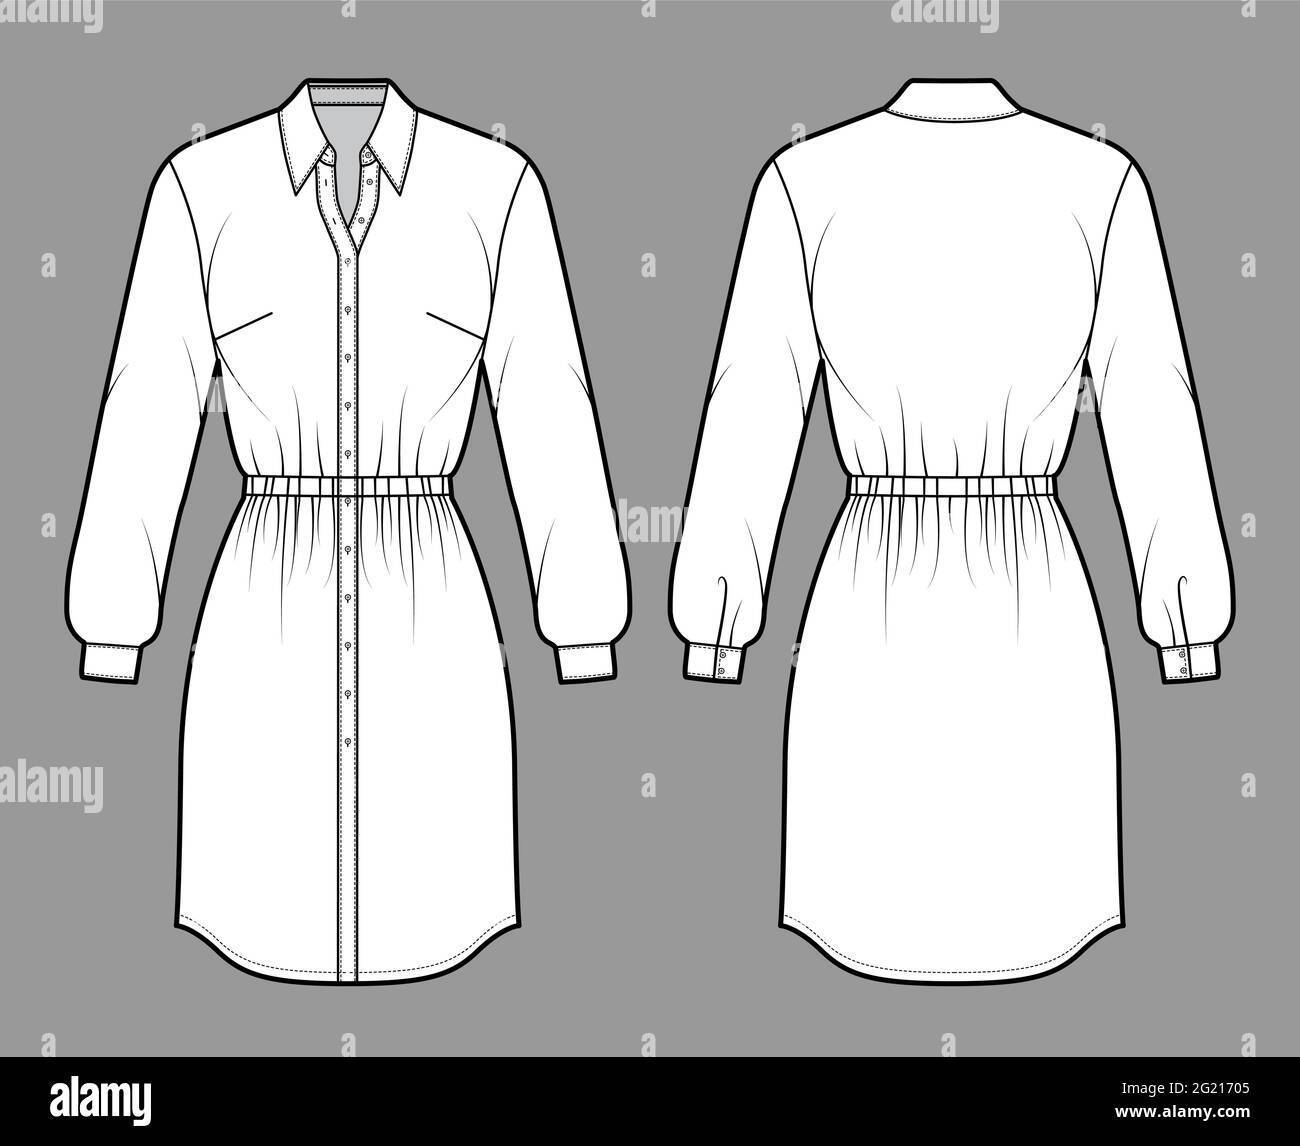 Dress shirt technical fashion illustration with gathered waist, long sleeves, fitted, pencil skirt, collar, button closure. Flat apparel front, back, white color style. Women, men unisex CAD mockup Stock Vector